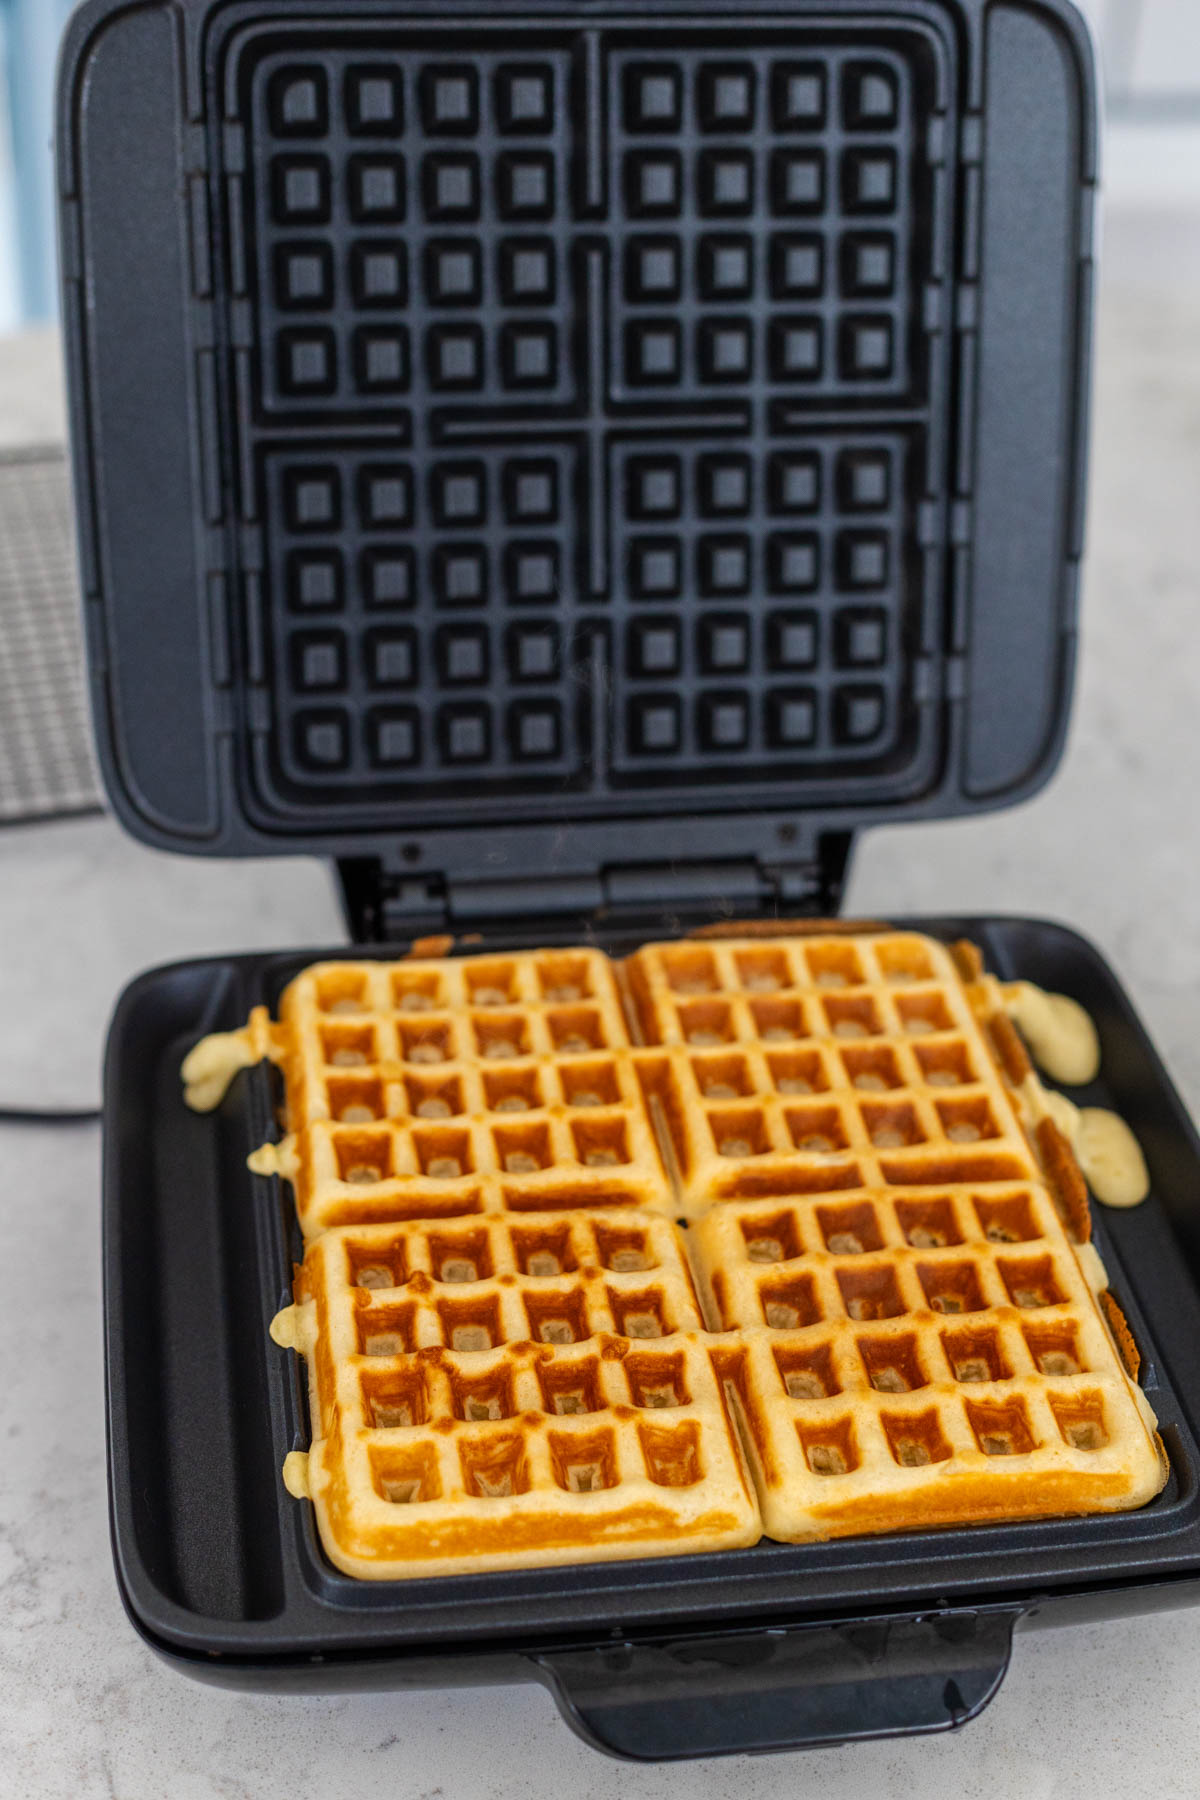 The waffles are finished cooking and are a gorgeous crispy golden brown.